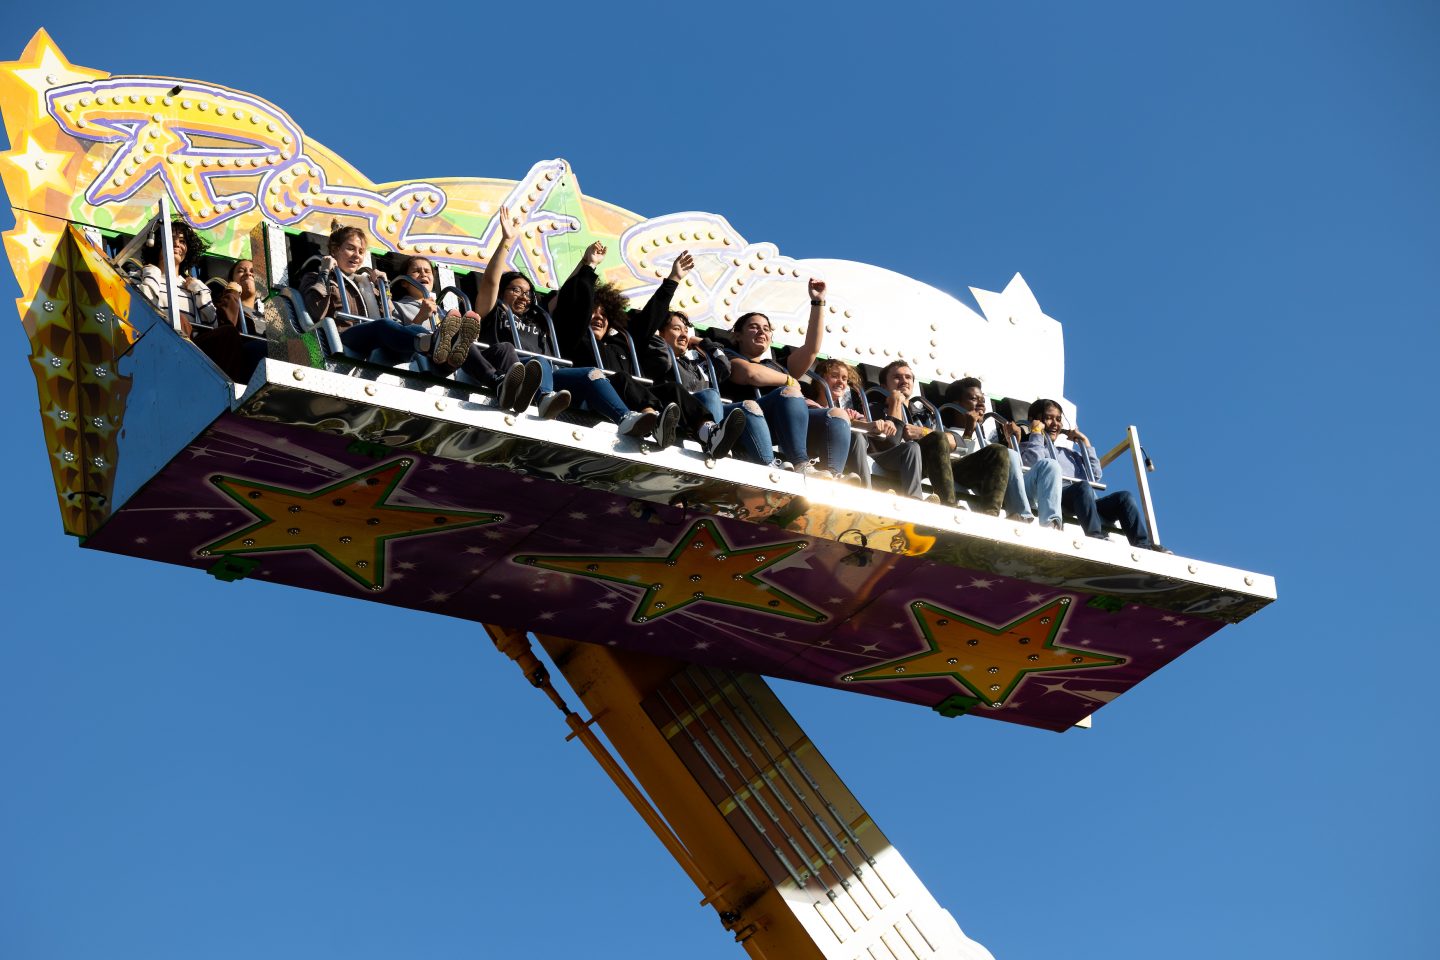 Panthers and friends embrace the thrill of the ride at the Spirit Carnival 2022